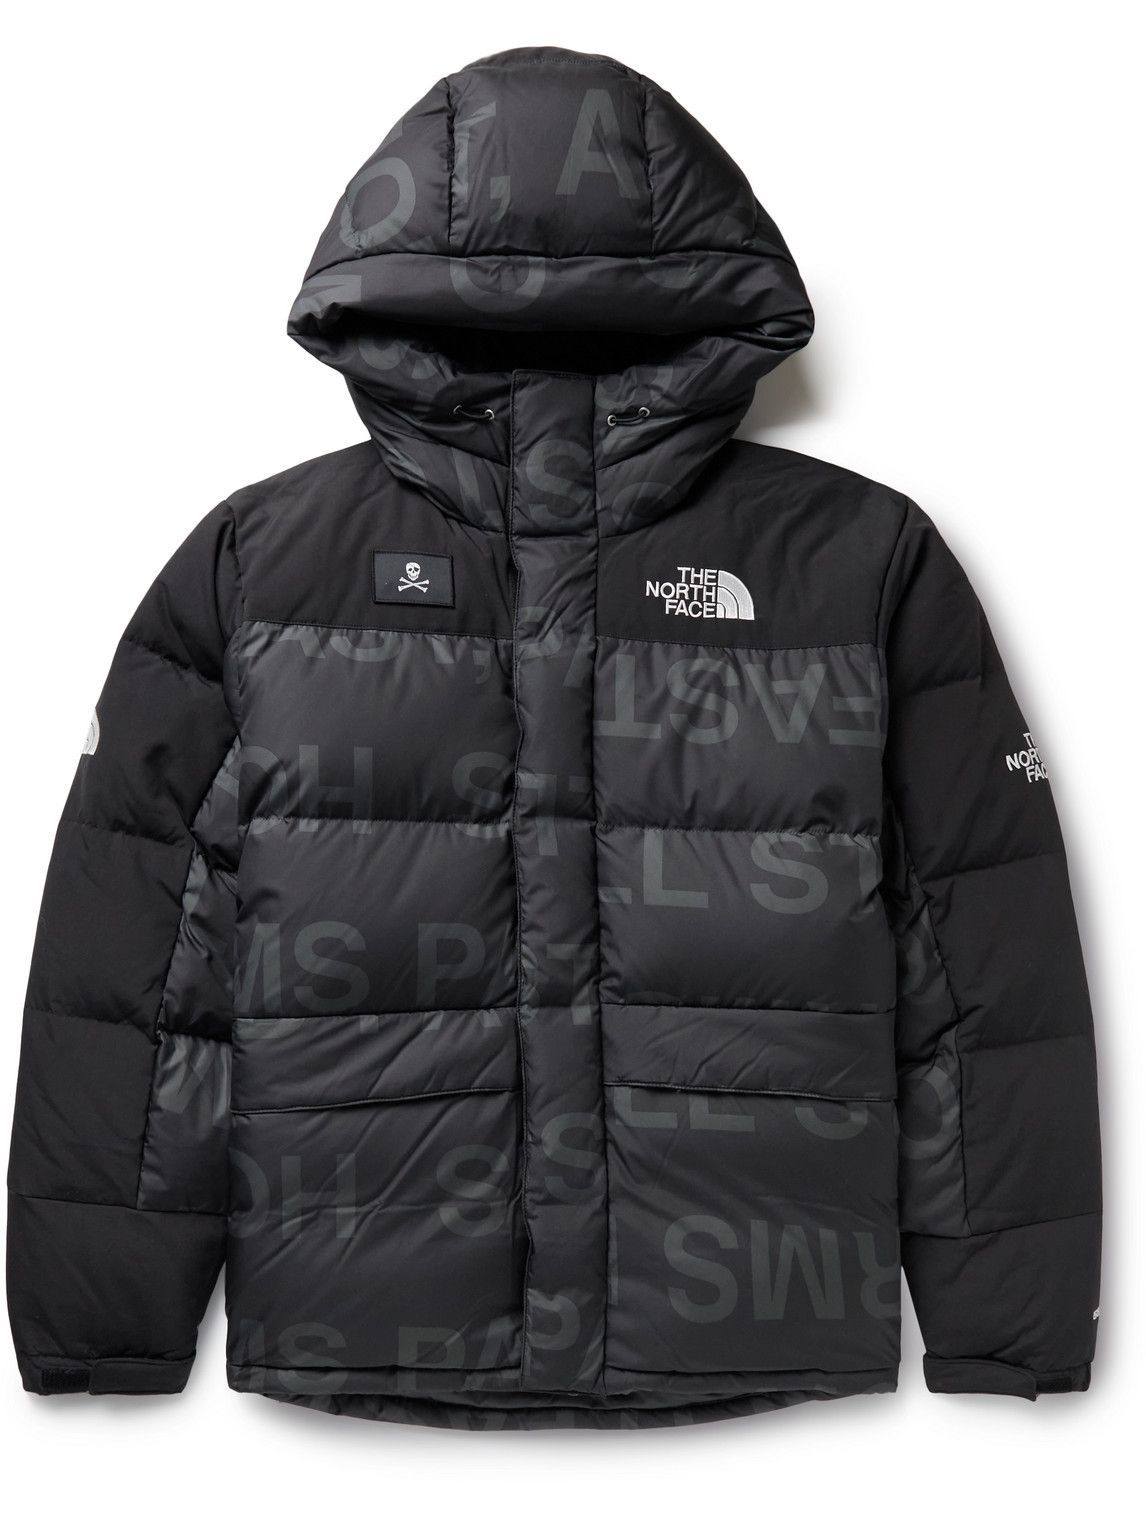 Photo: The North Face - Conrad Anker HMLYN Appliquéd Quilted Printed Shell Down Jacket - Black